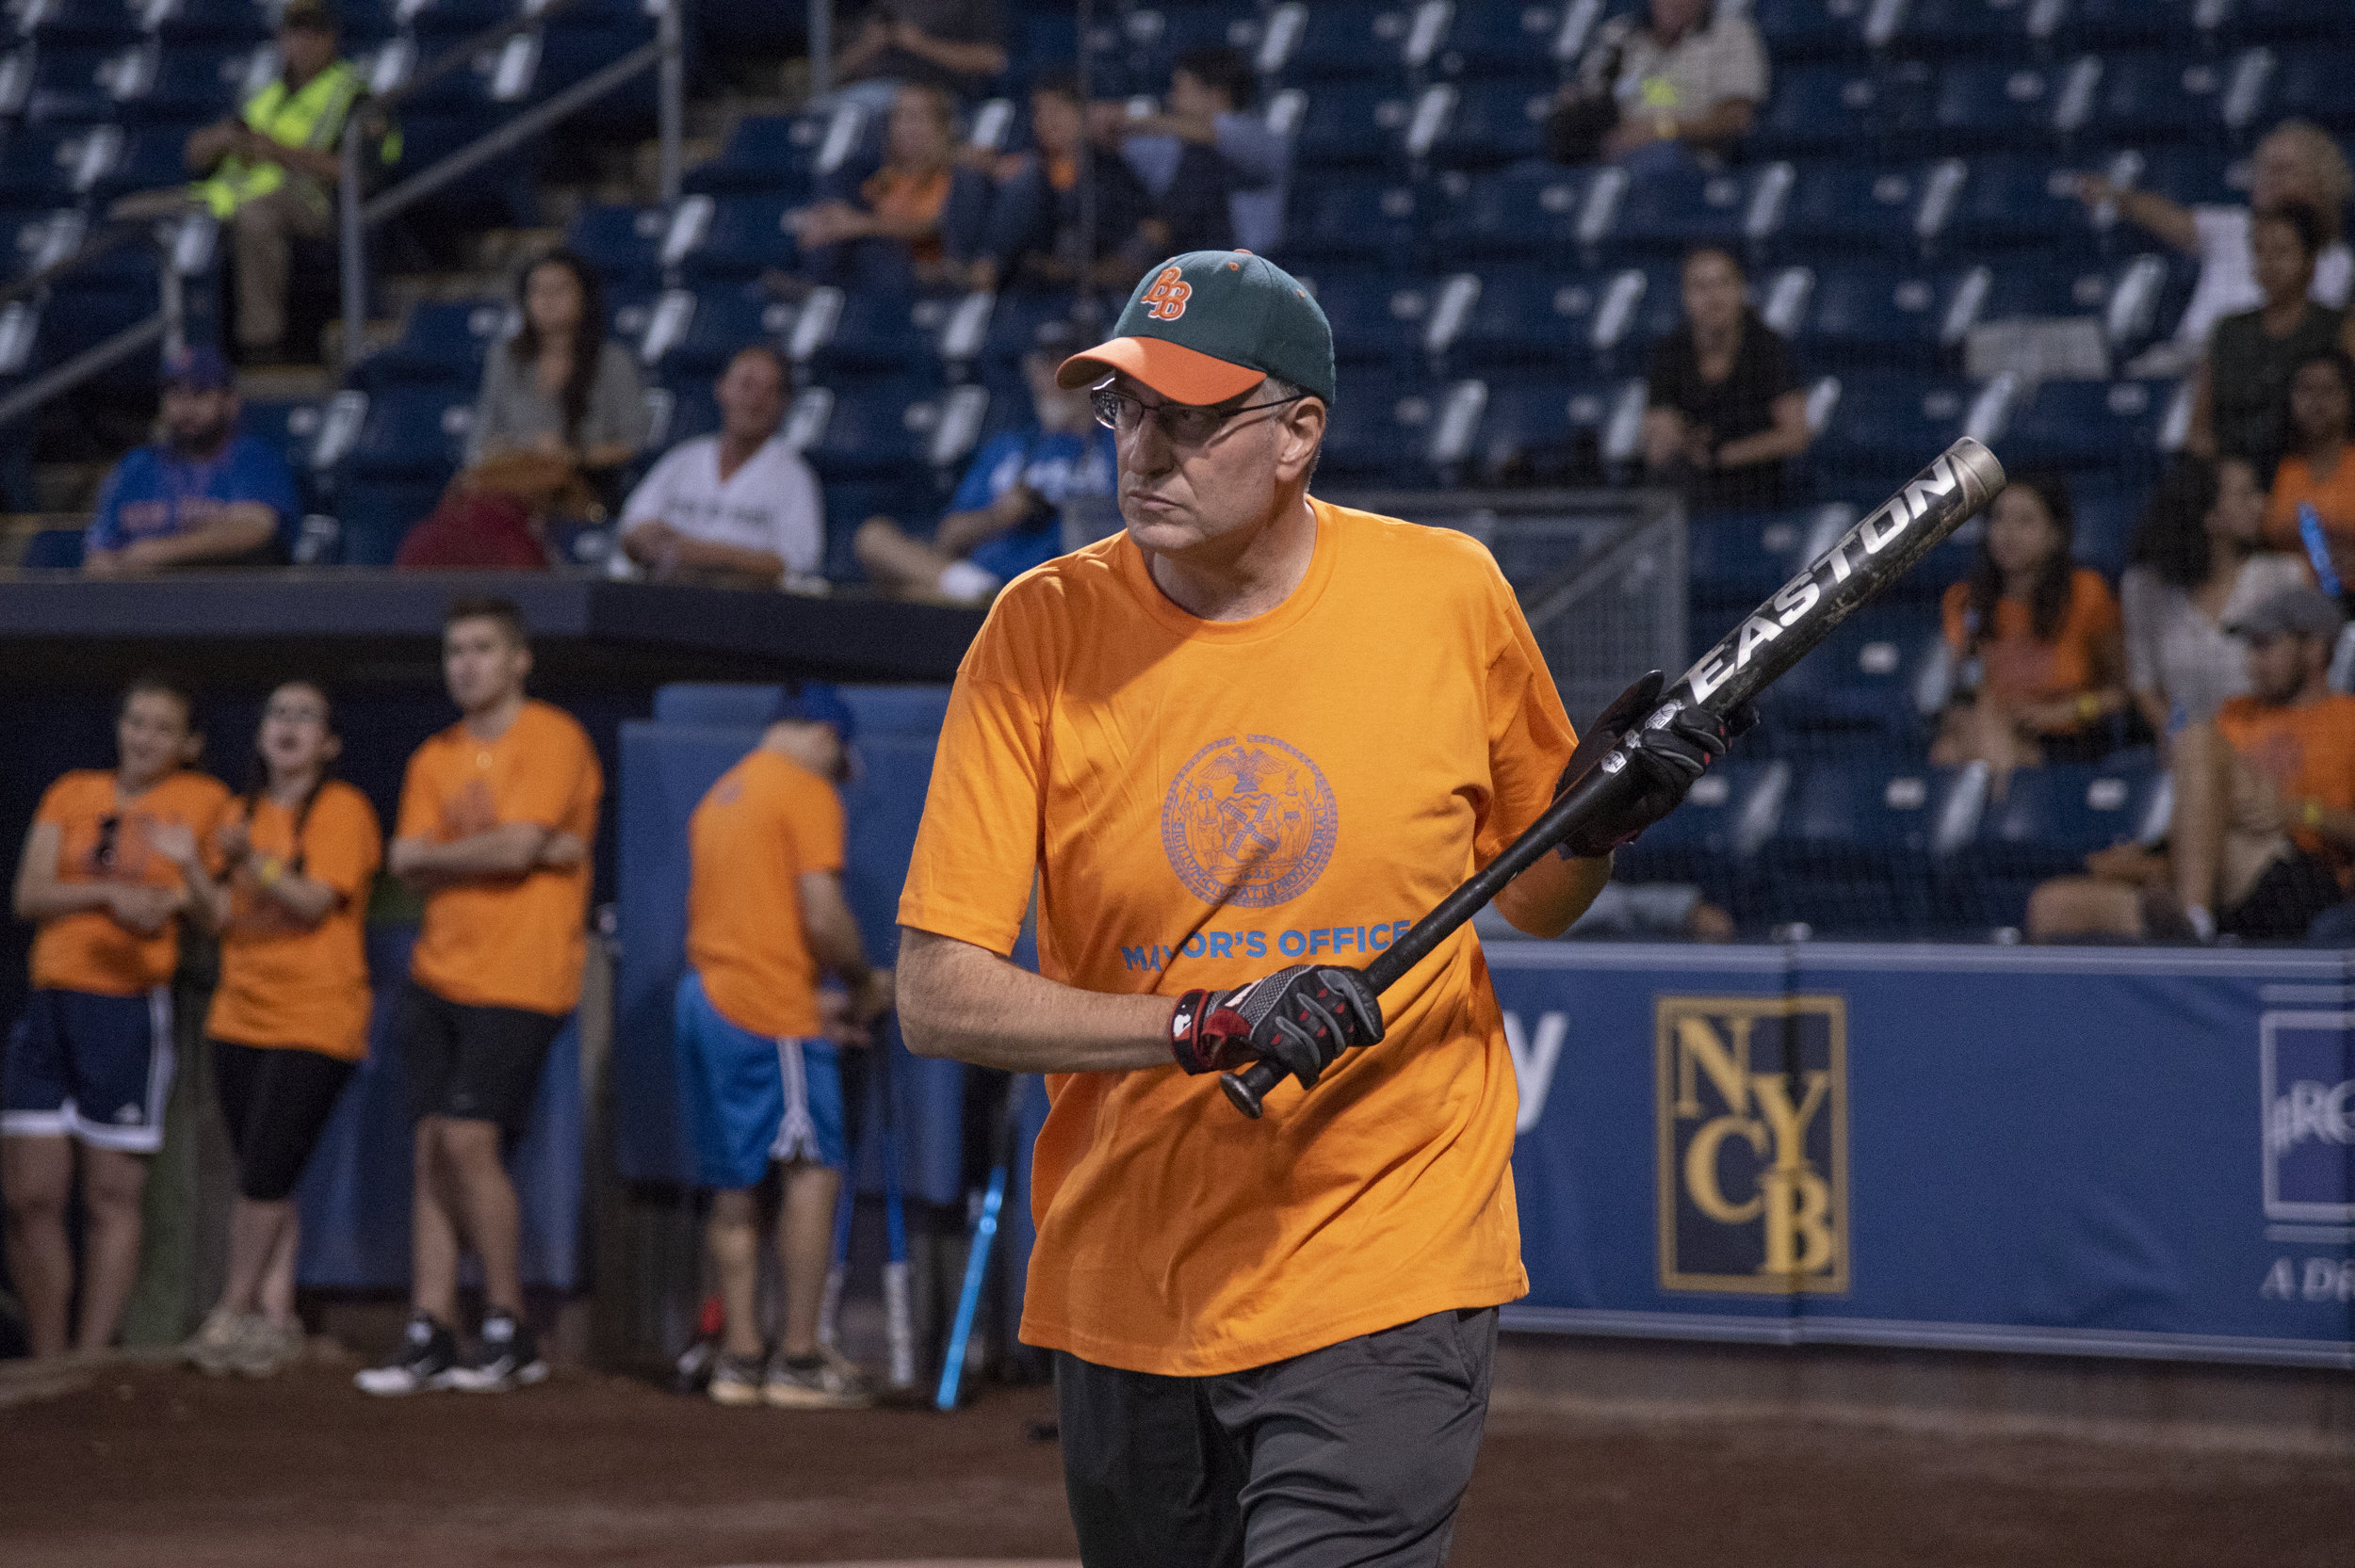 Mayor Bill de Blasio Comes To Bat As His Office Faces Off Against The City Council In Their Annual Softball game